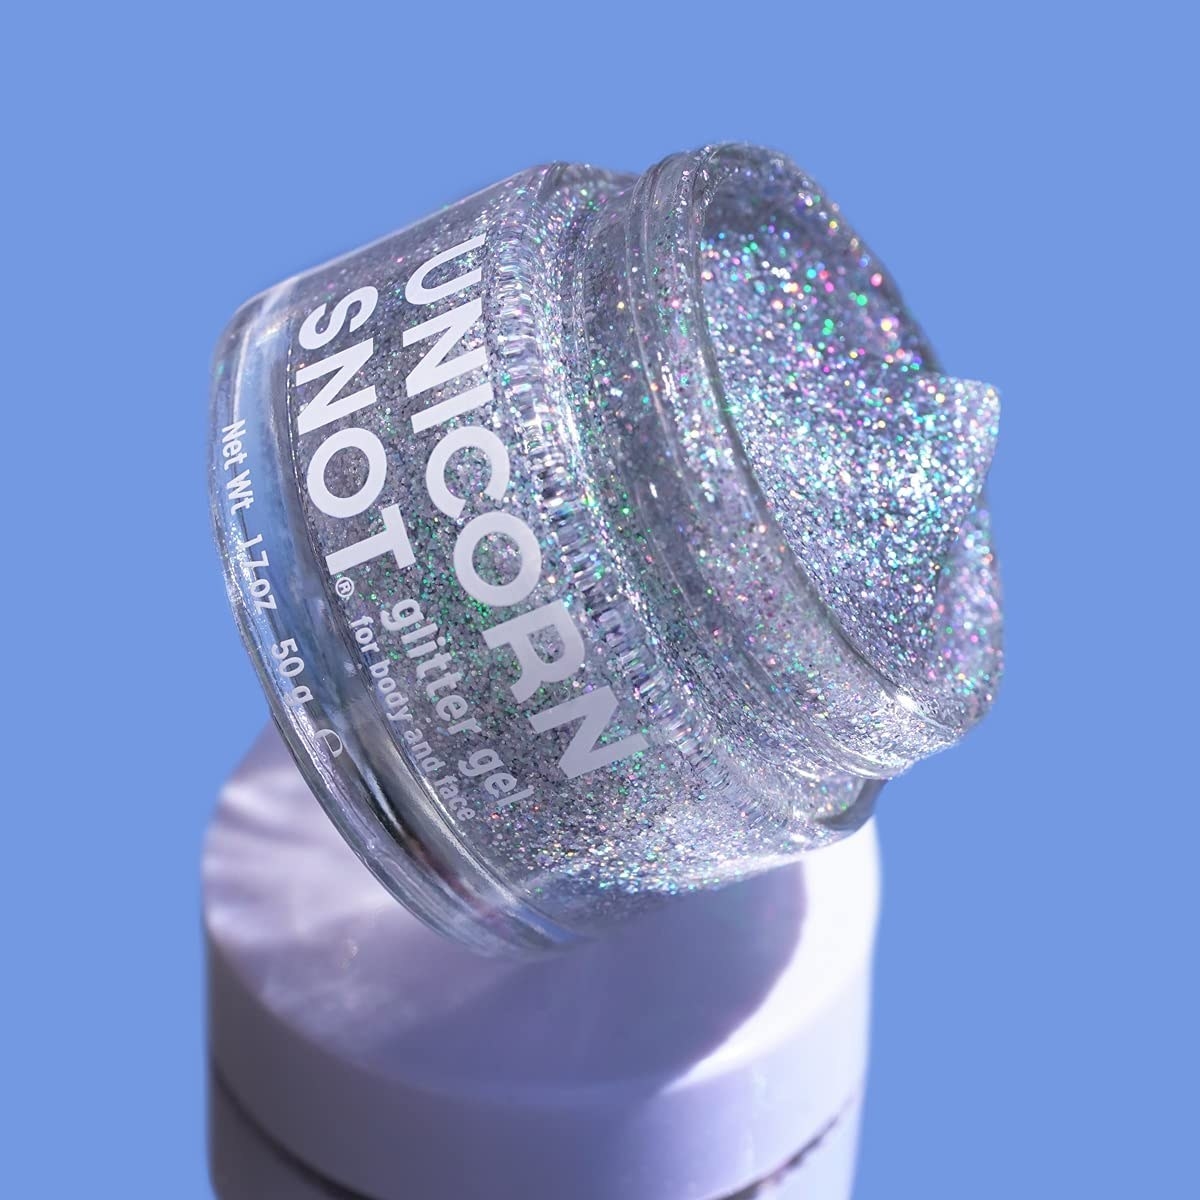 The holographic glitter on a pedestal